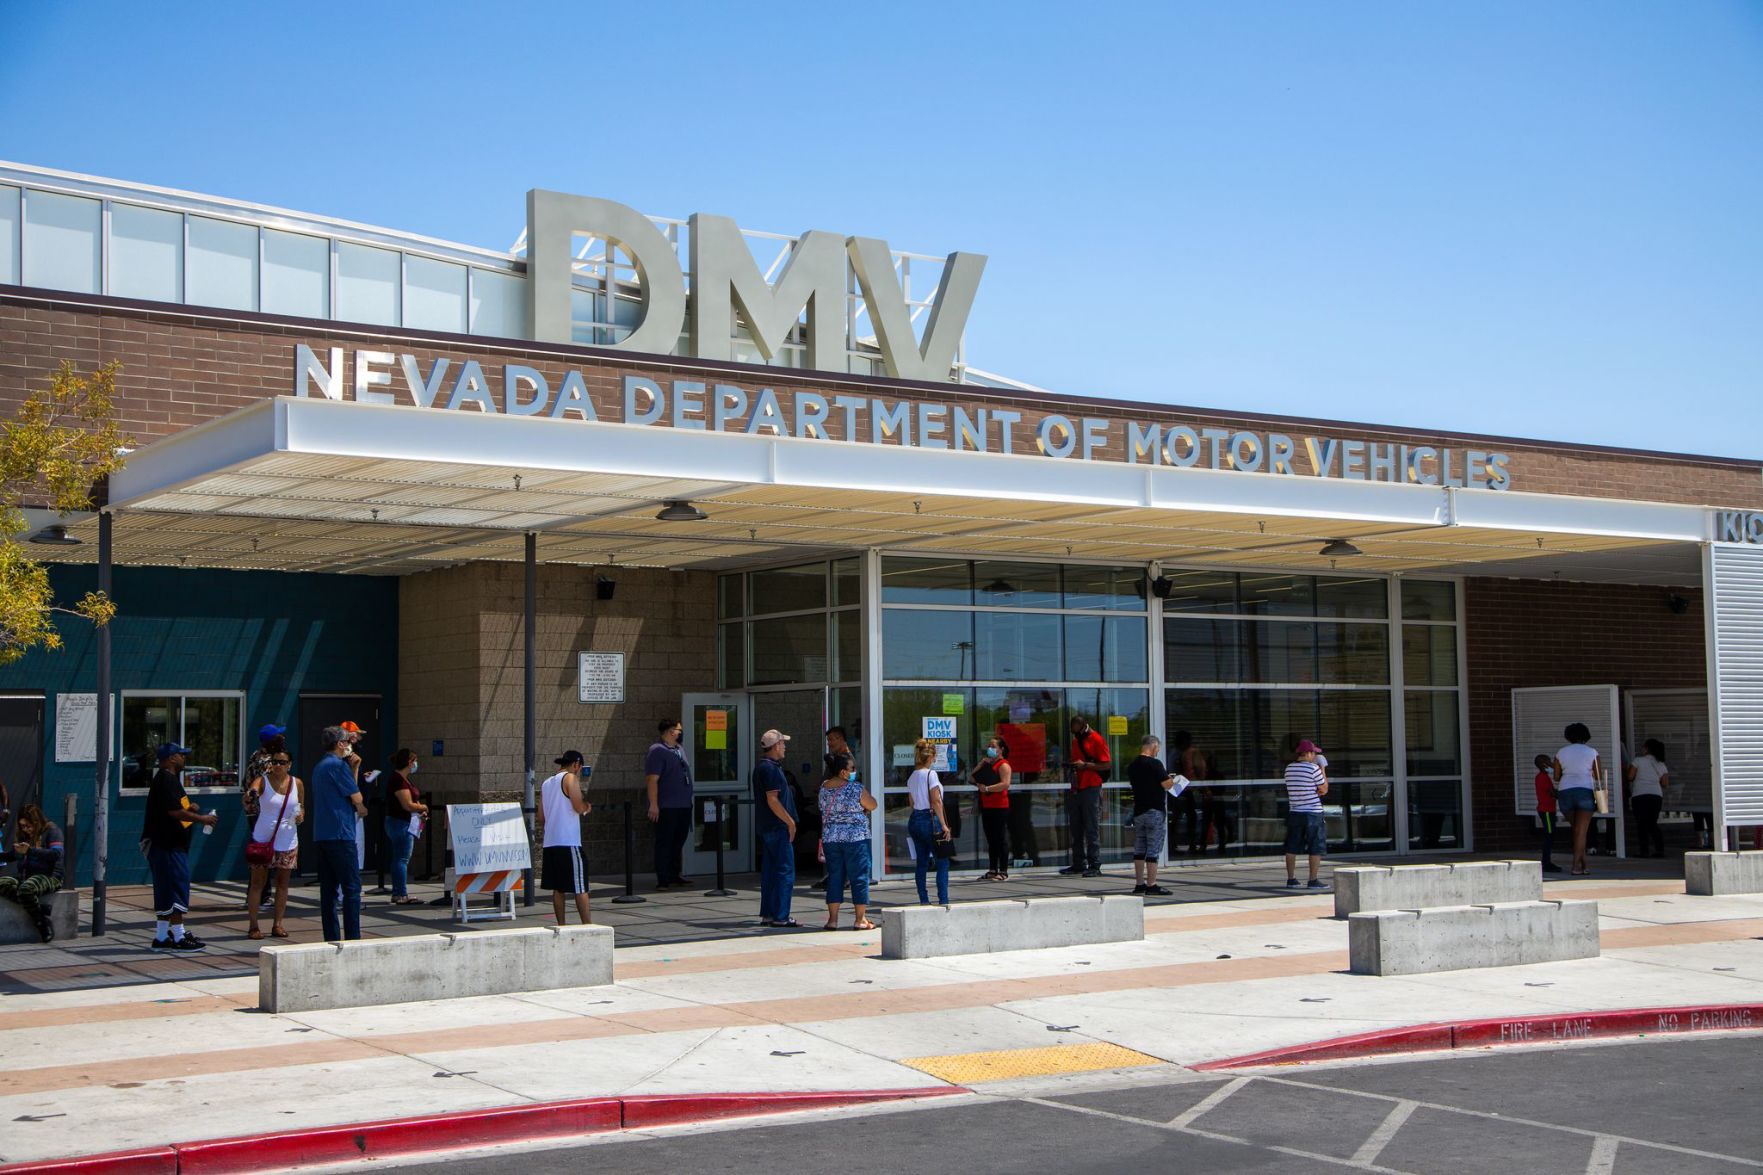 Nevada Driver's License - What to bring and expect at the DMV 